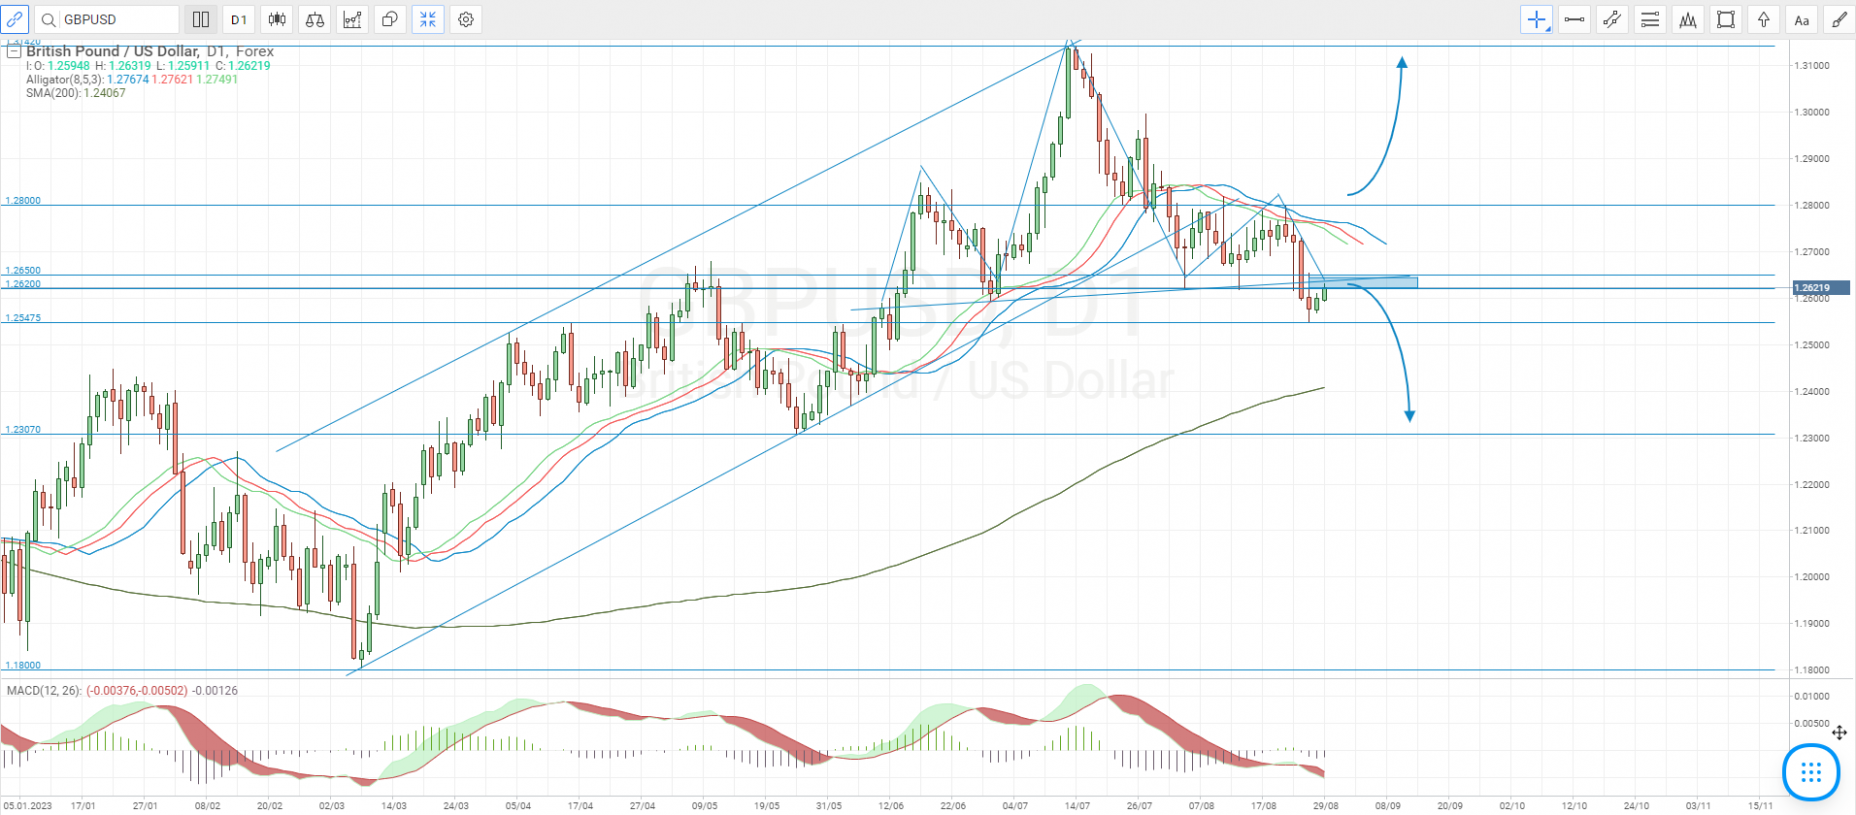 Technical analysis of the GBP/USD currency pair